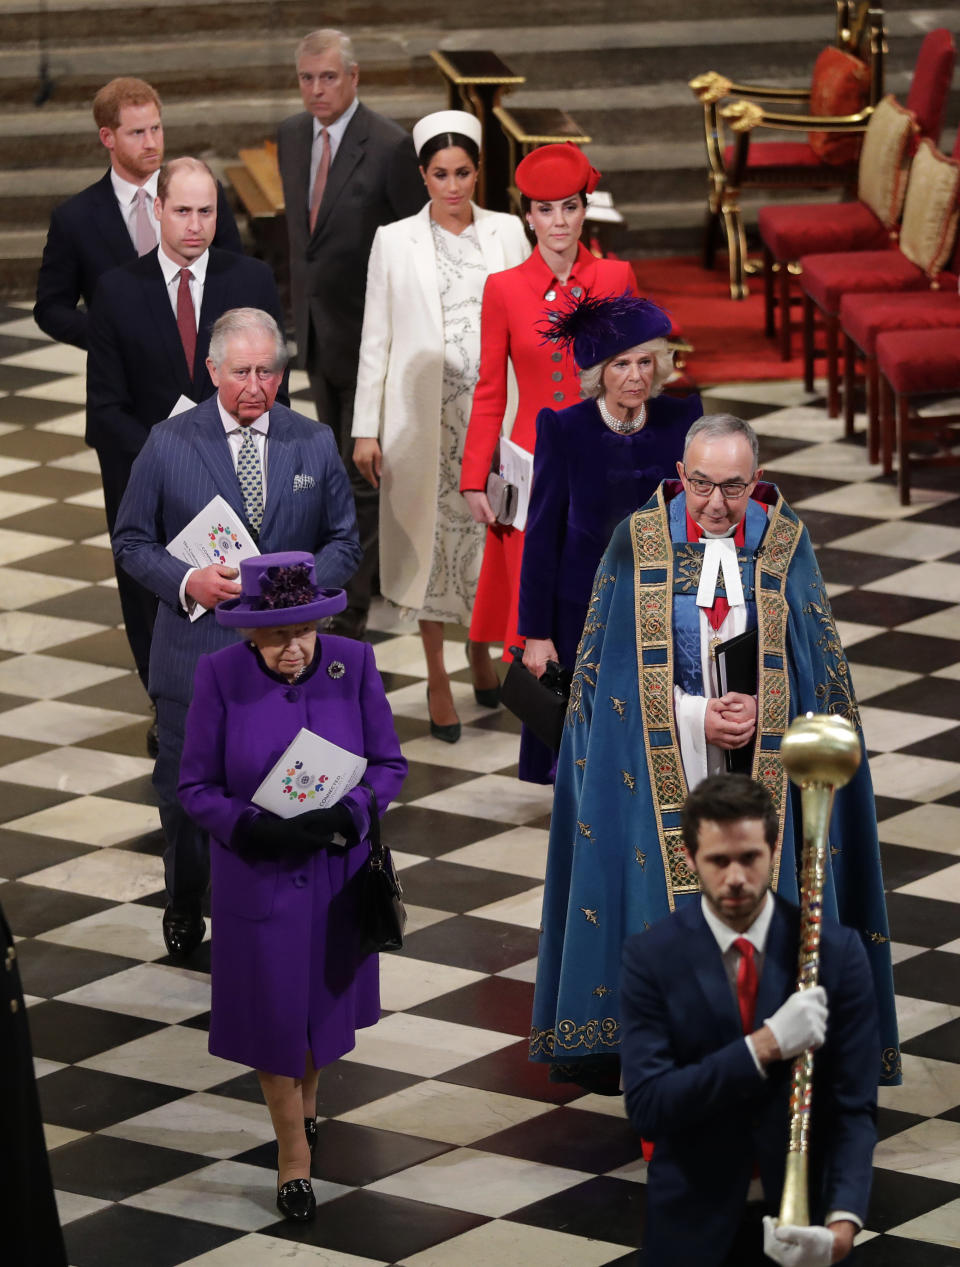 The royal family leaving the&nbsp;Commonwealth Day service.&nbsp; (Photo: KIRSTY WIGGLESWORTH via Getty Images)